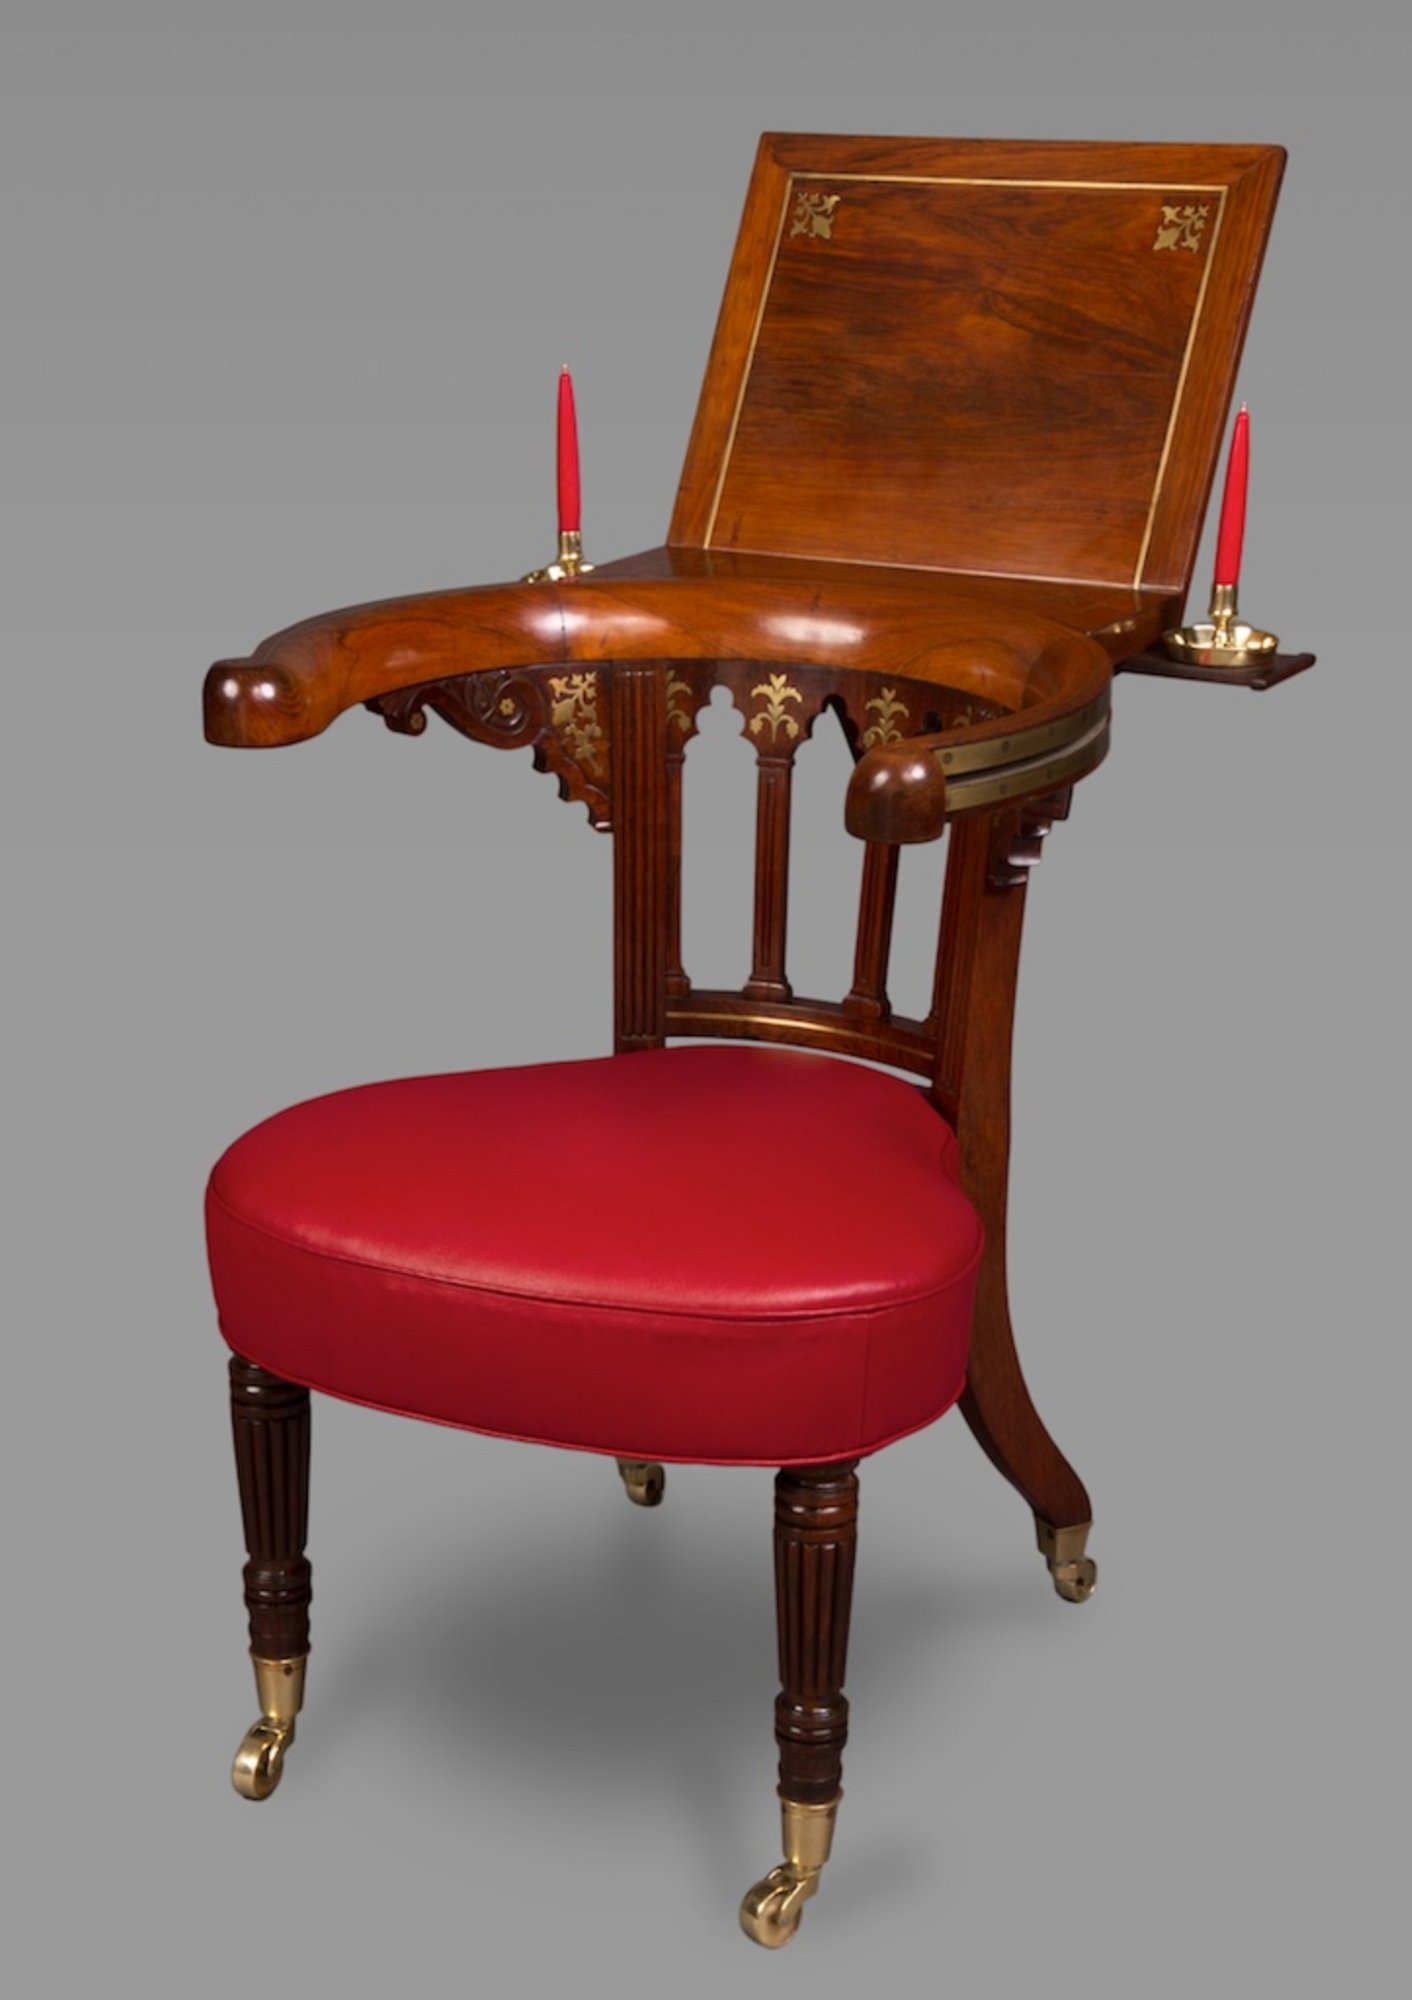 Antique Reading Chair on Sale